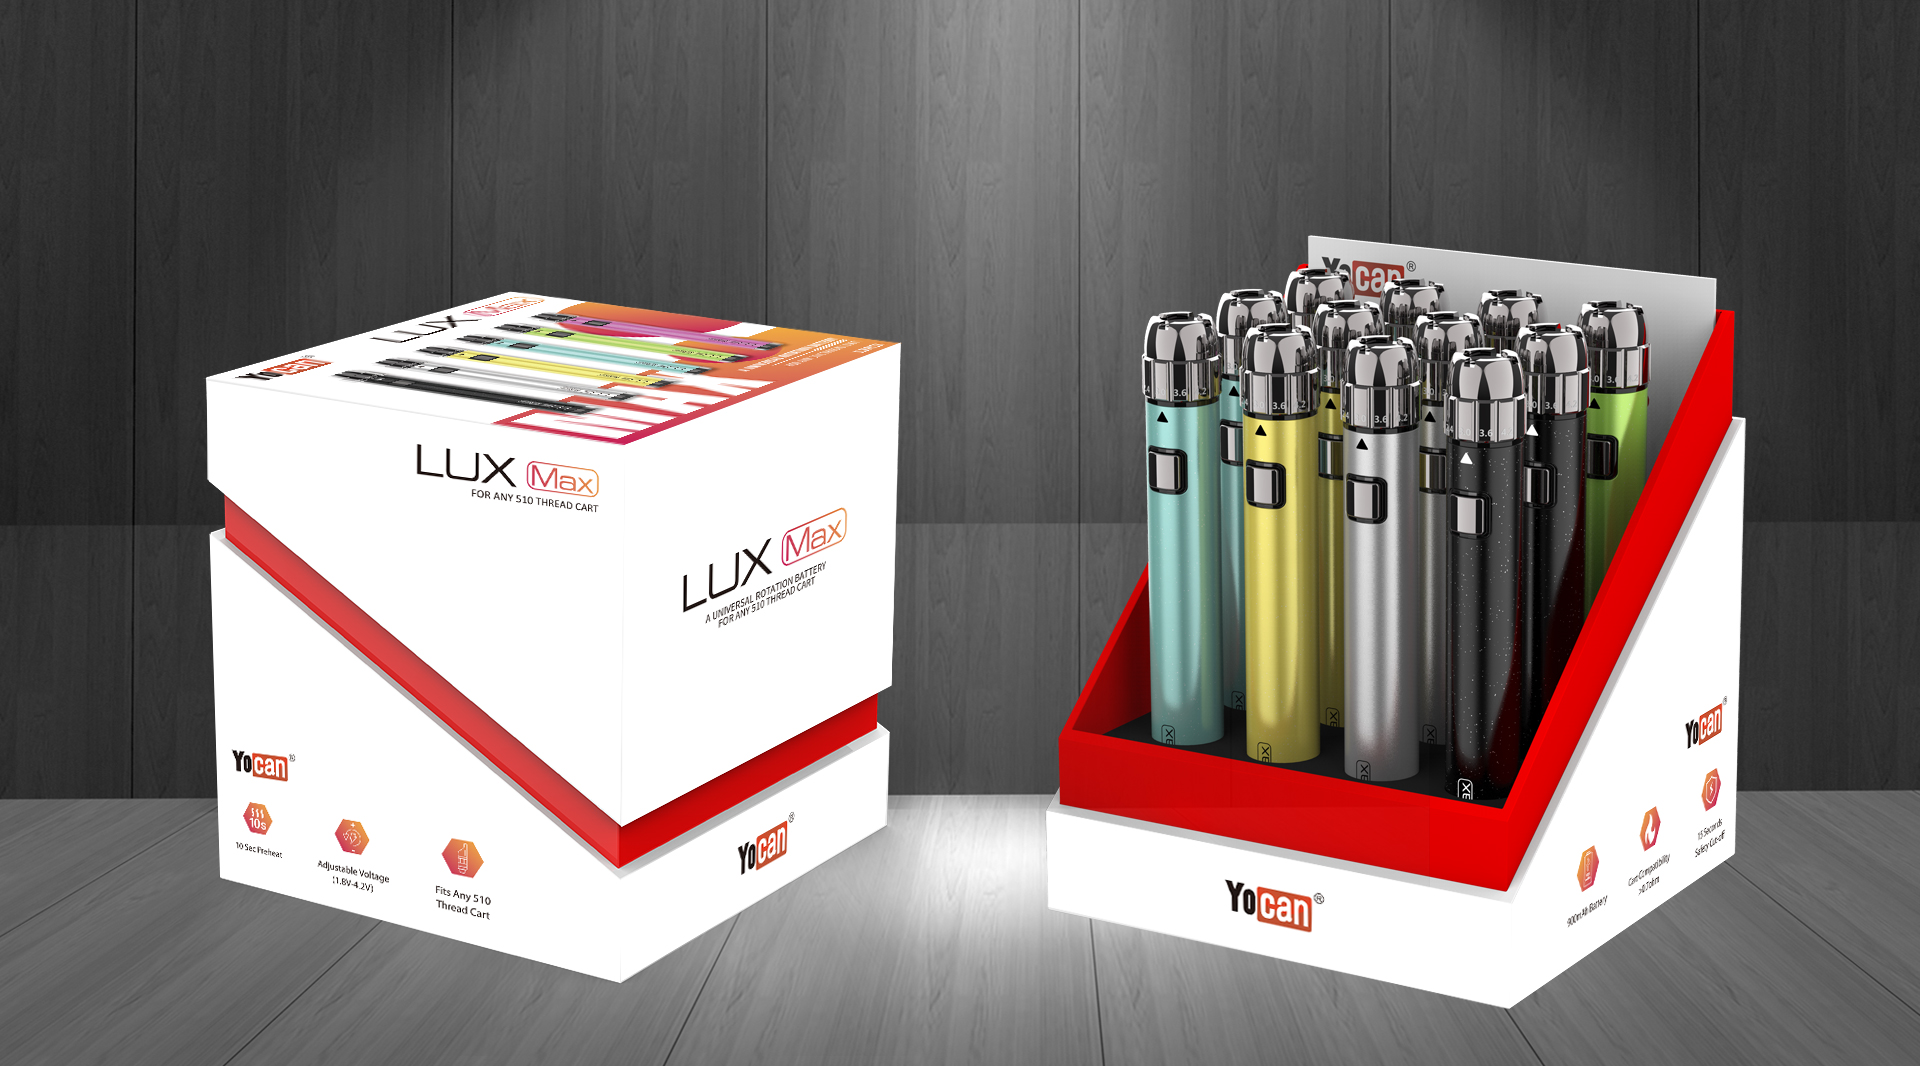 Package of the Yocan LUX Max 510 Threaded Vape Pen Battery